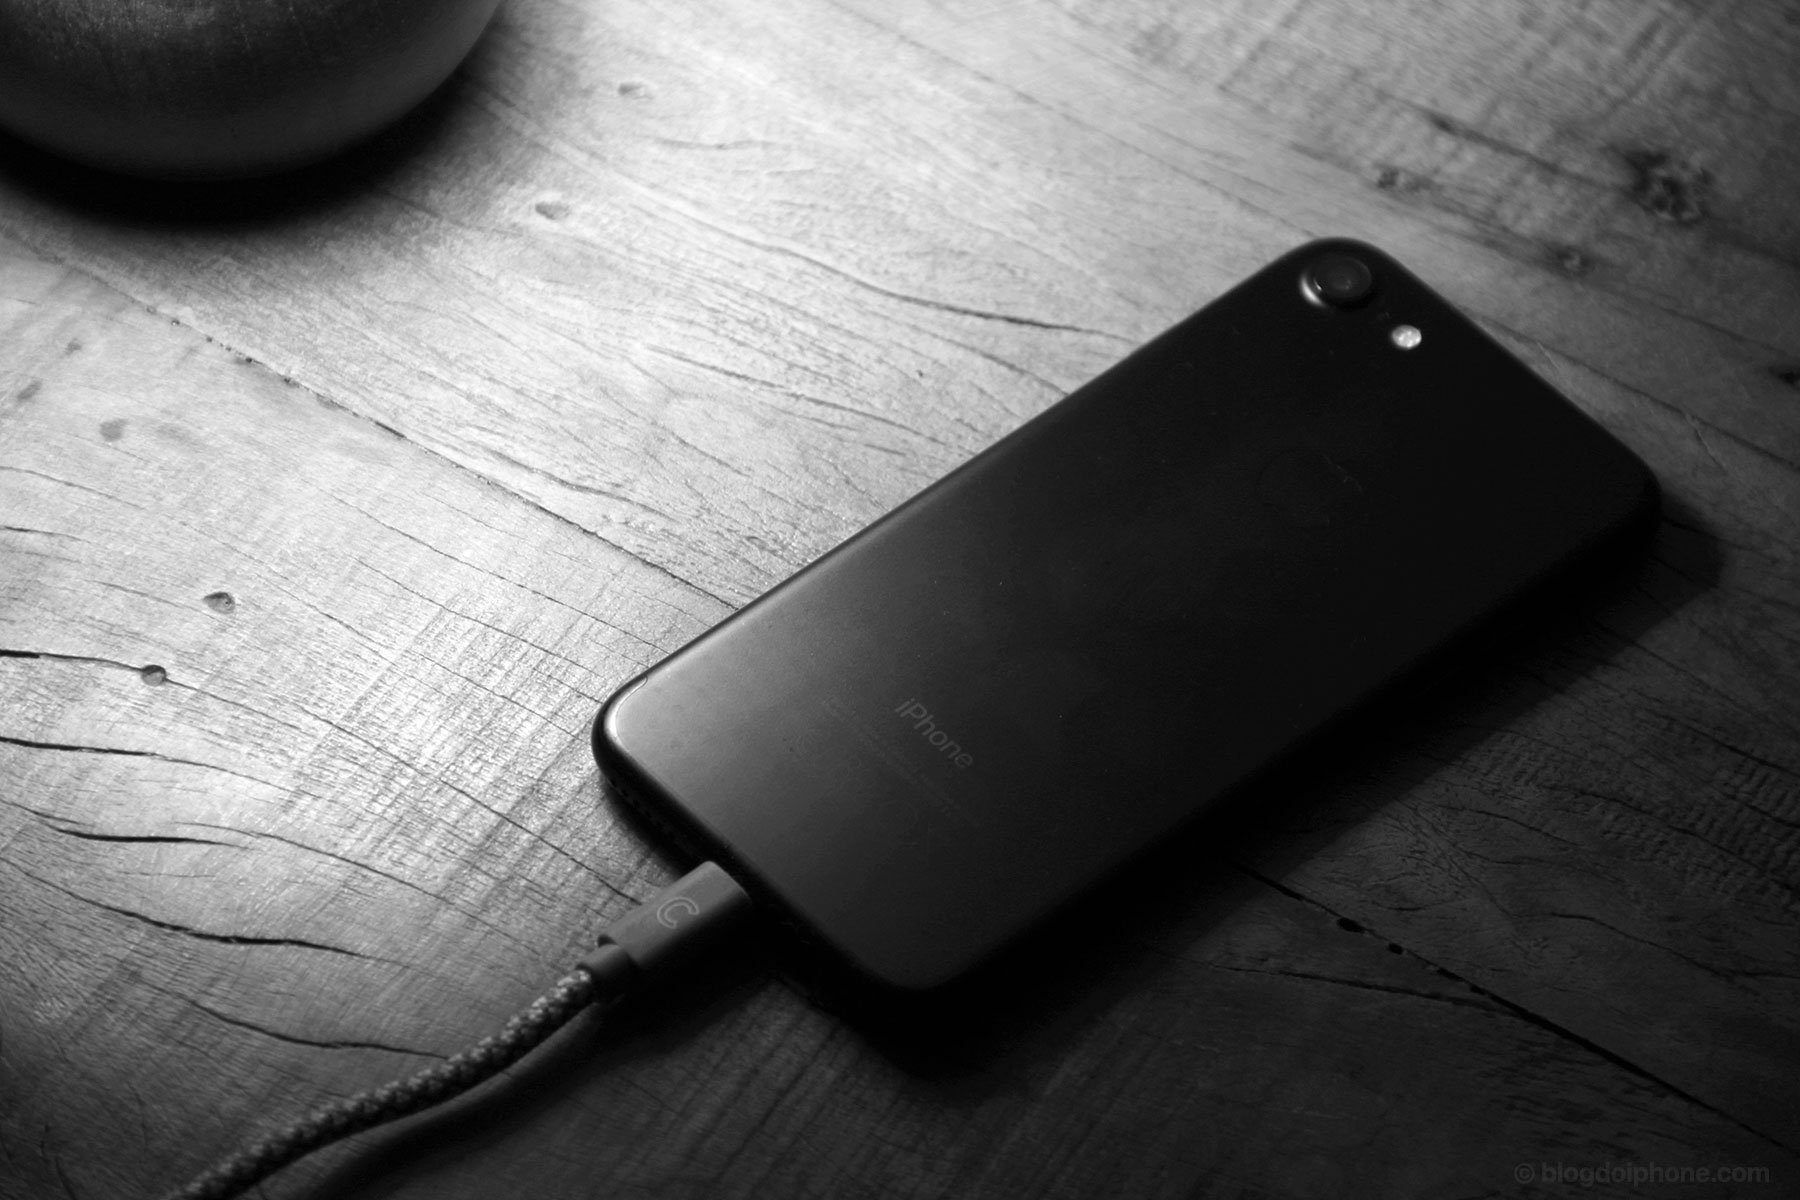 Leaving iPhone charging all night does NOT damage the battery